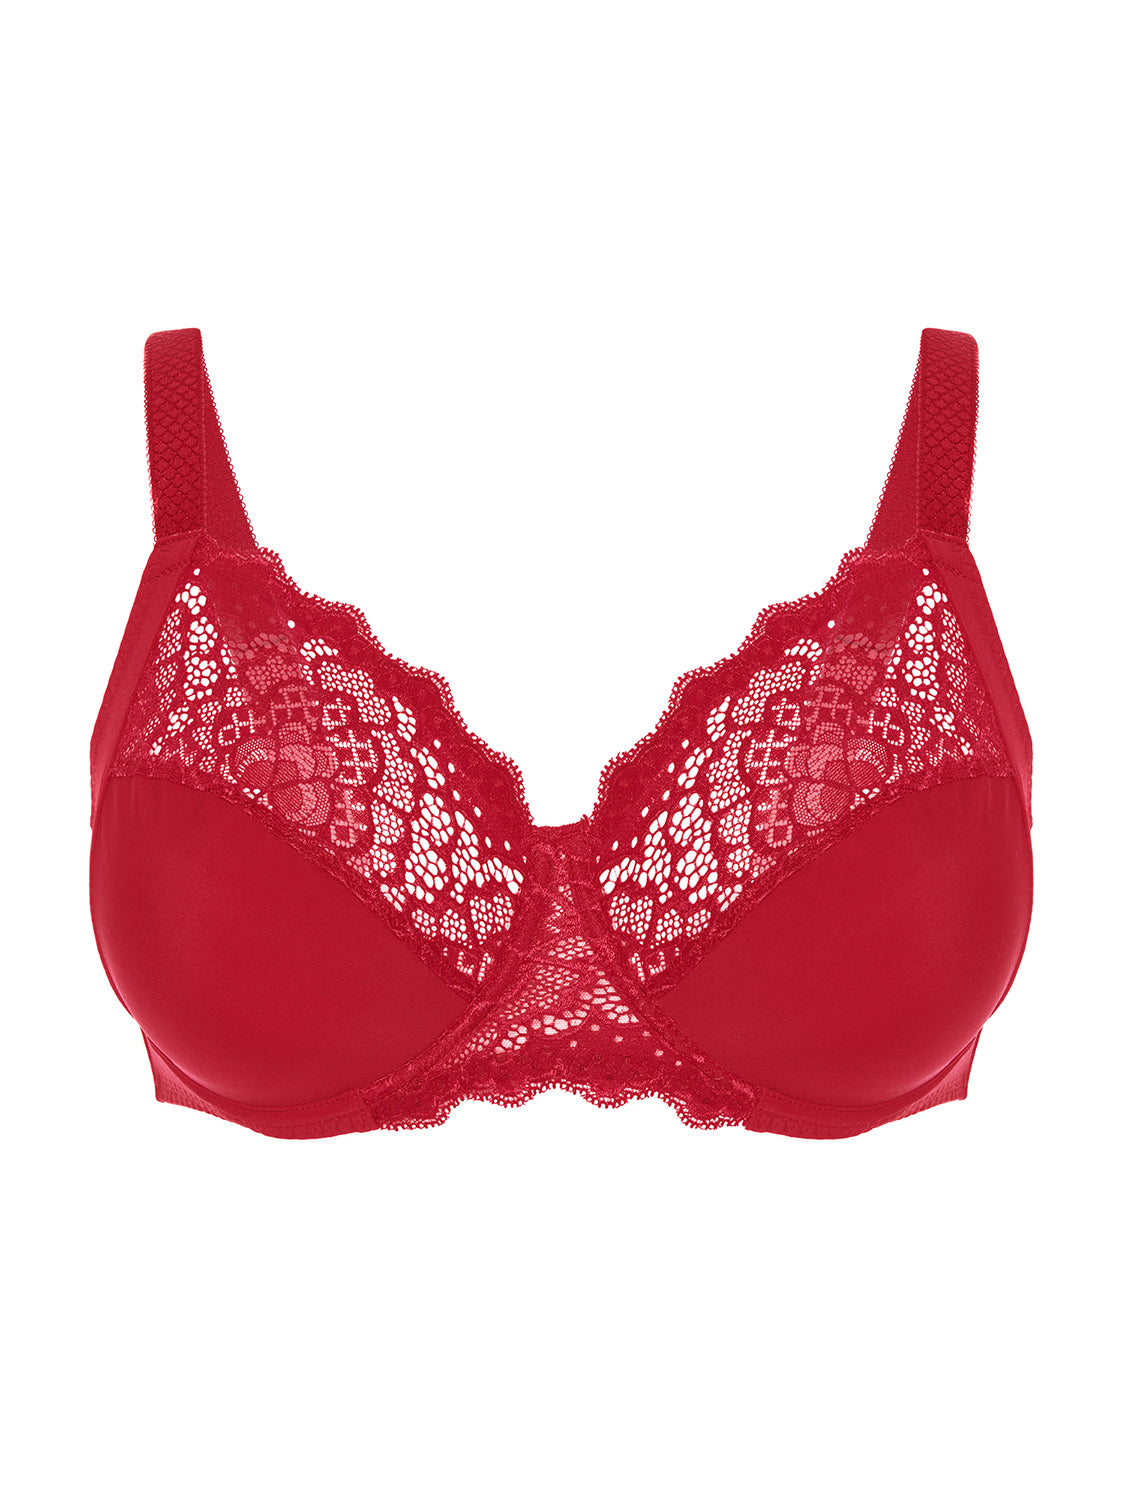 Caresse Full Cup - Tango Red